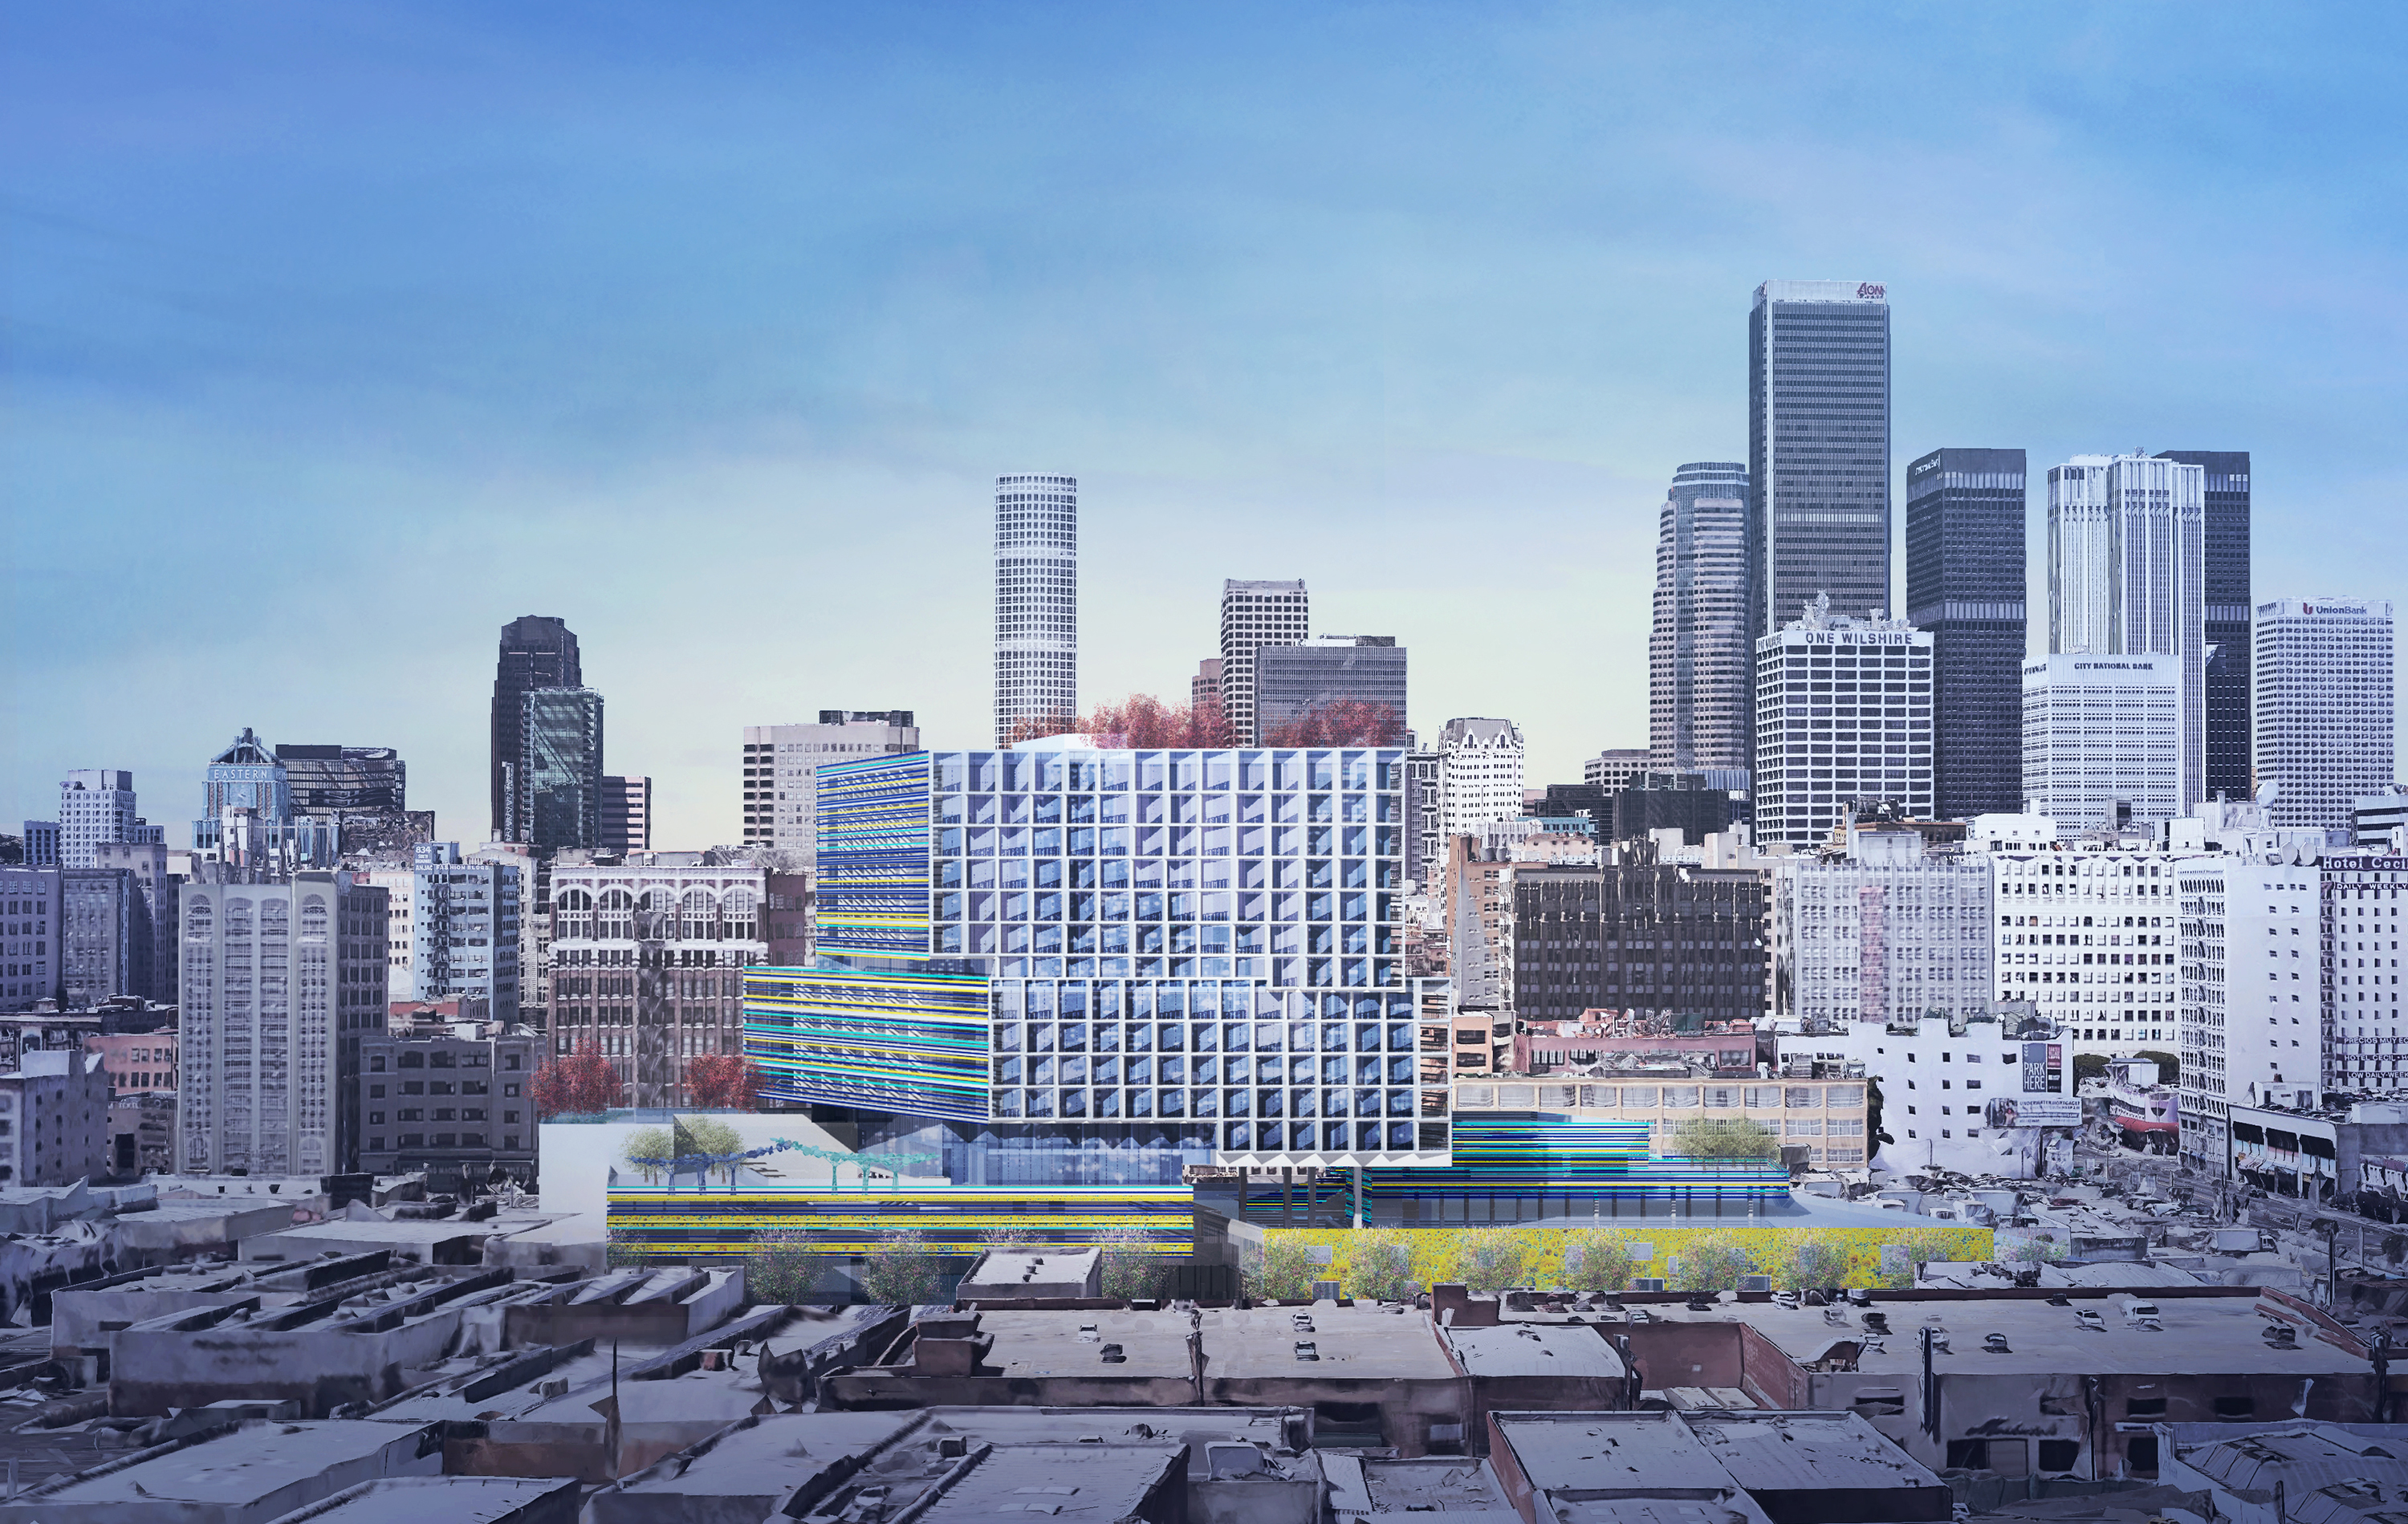 A rendering of the new development, which rises to 15 stories, against the backdrop of the Downtown LA skyline.